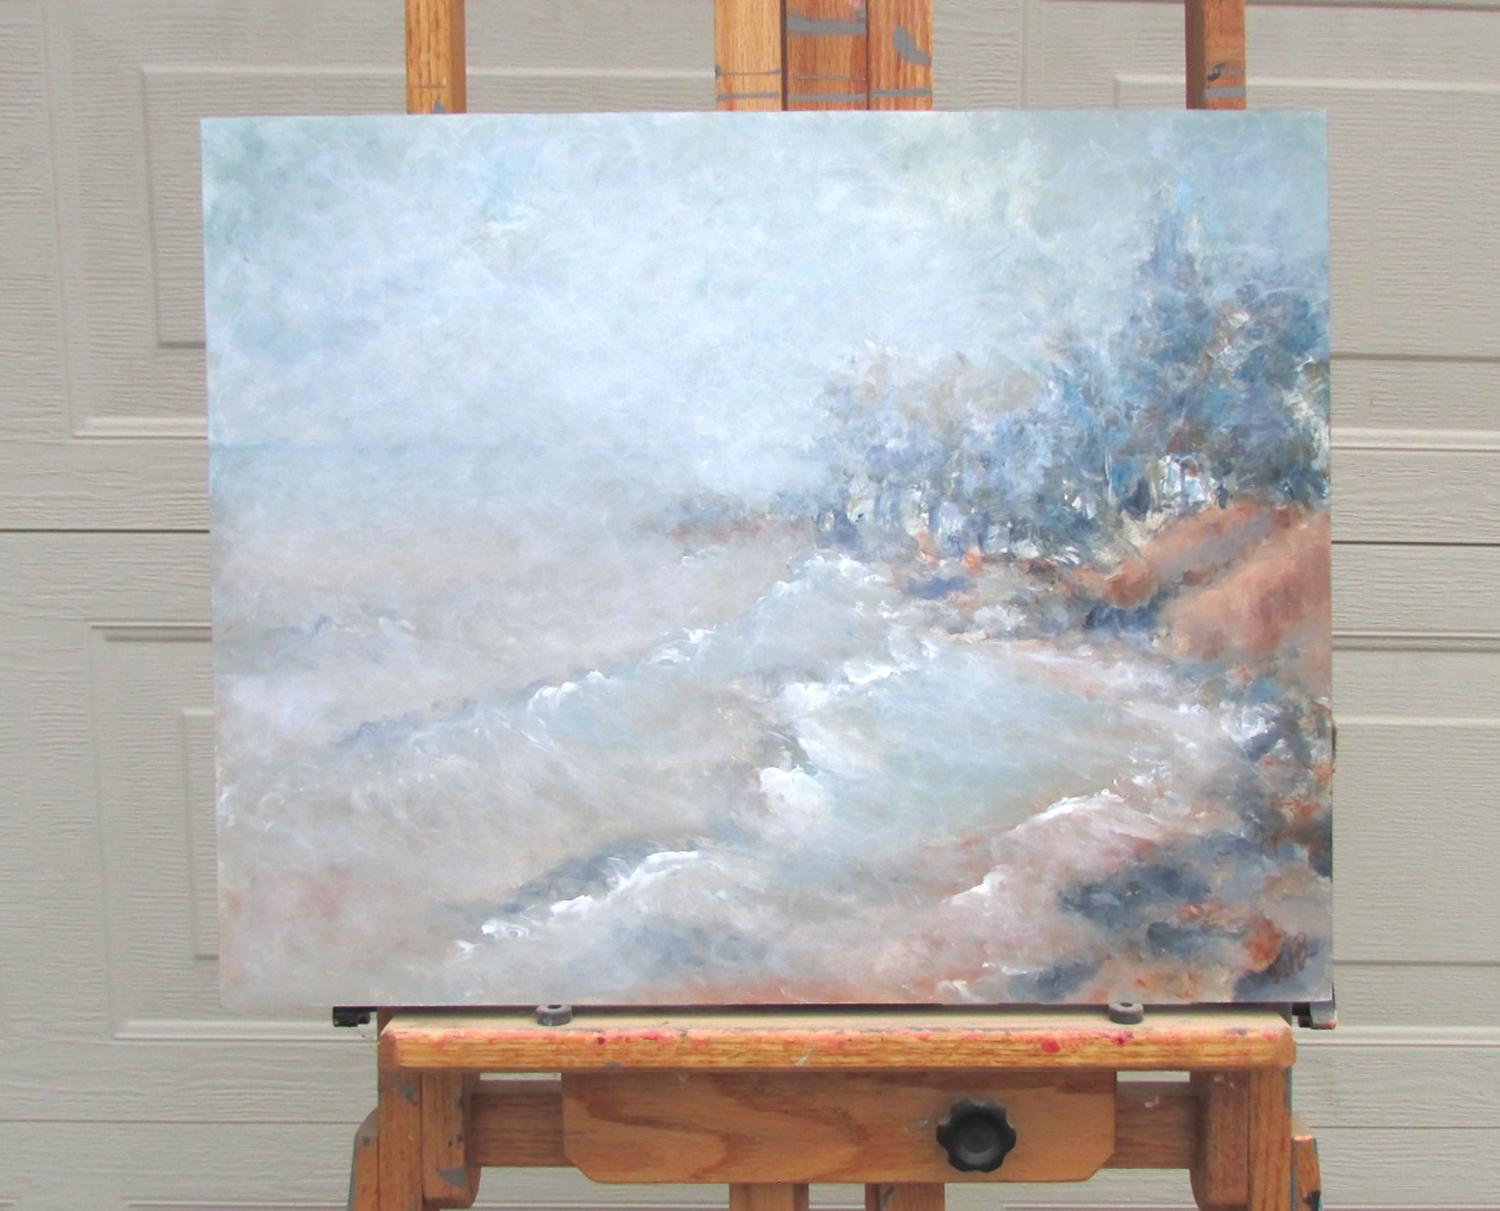 <p>Artist Comments<br>Foggy mists wrap the shore in the early morning, shrouding the waves as they vanish into the horizon. The soft, pale colors imbue the scene with a soothing and dreamlike ambiance. Artist Valerie Berkeley uses her fingertips to